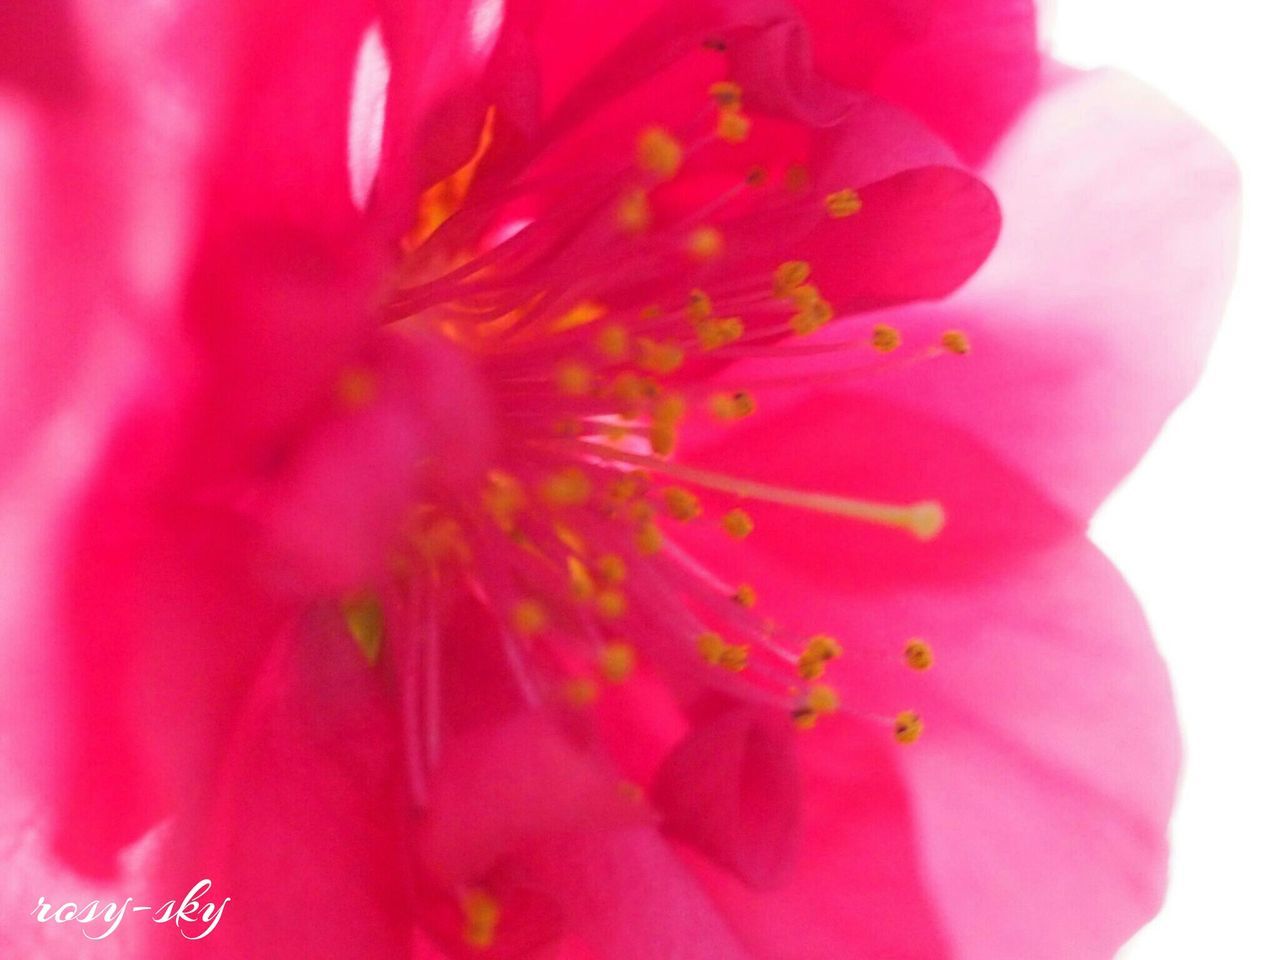 flower, petal, freshness, flower head, fragility, beauty in nature, close-up, red, growth, single flower, pollen, pink color, stamen, nature, blooming, extreme close-up, plant, in bloom, selective focus, macro